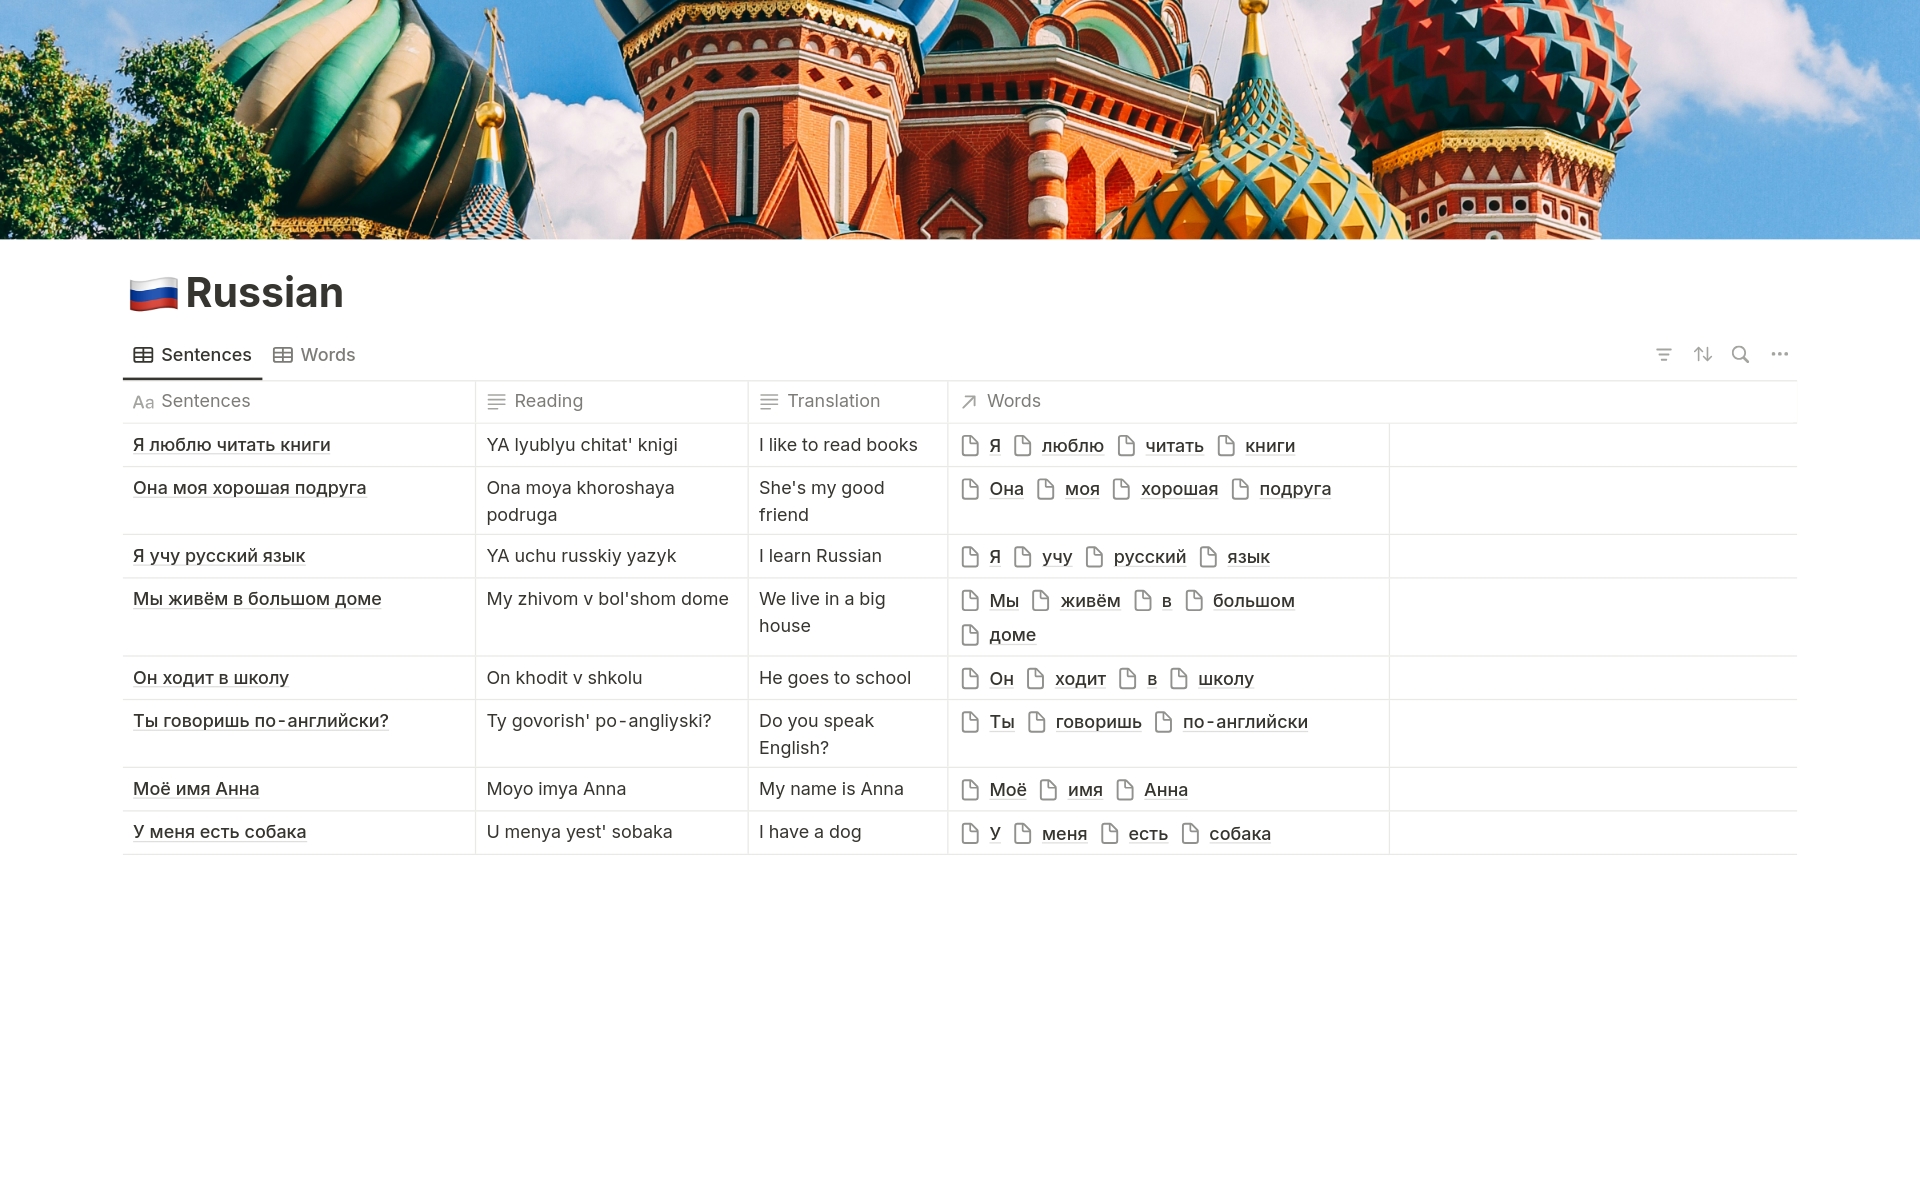 Explore the world of the Russian language in an organized and efficient way with our exclusive Notion template for Russian language learning! This vocabulary system is designed for those who want to master Russian in a systematic and interactive manner.